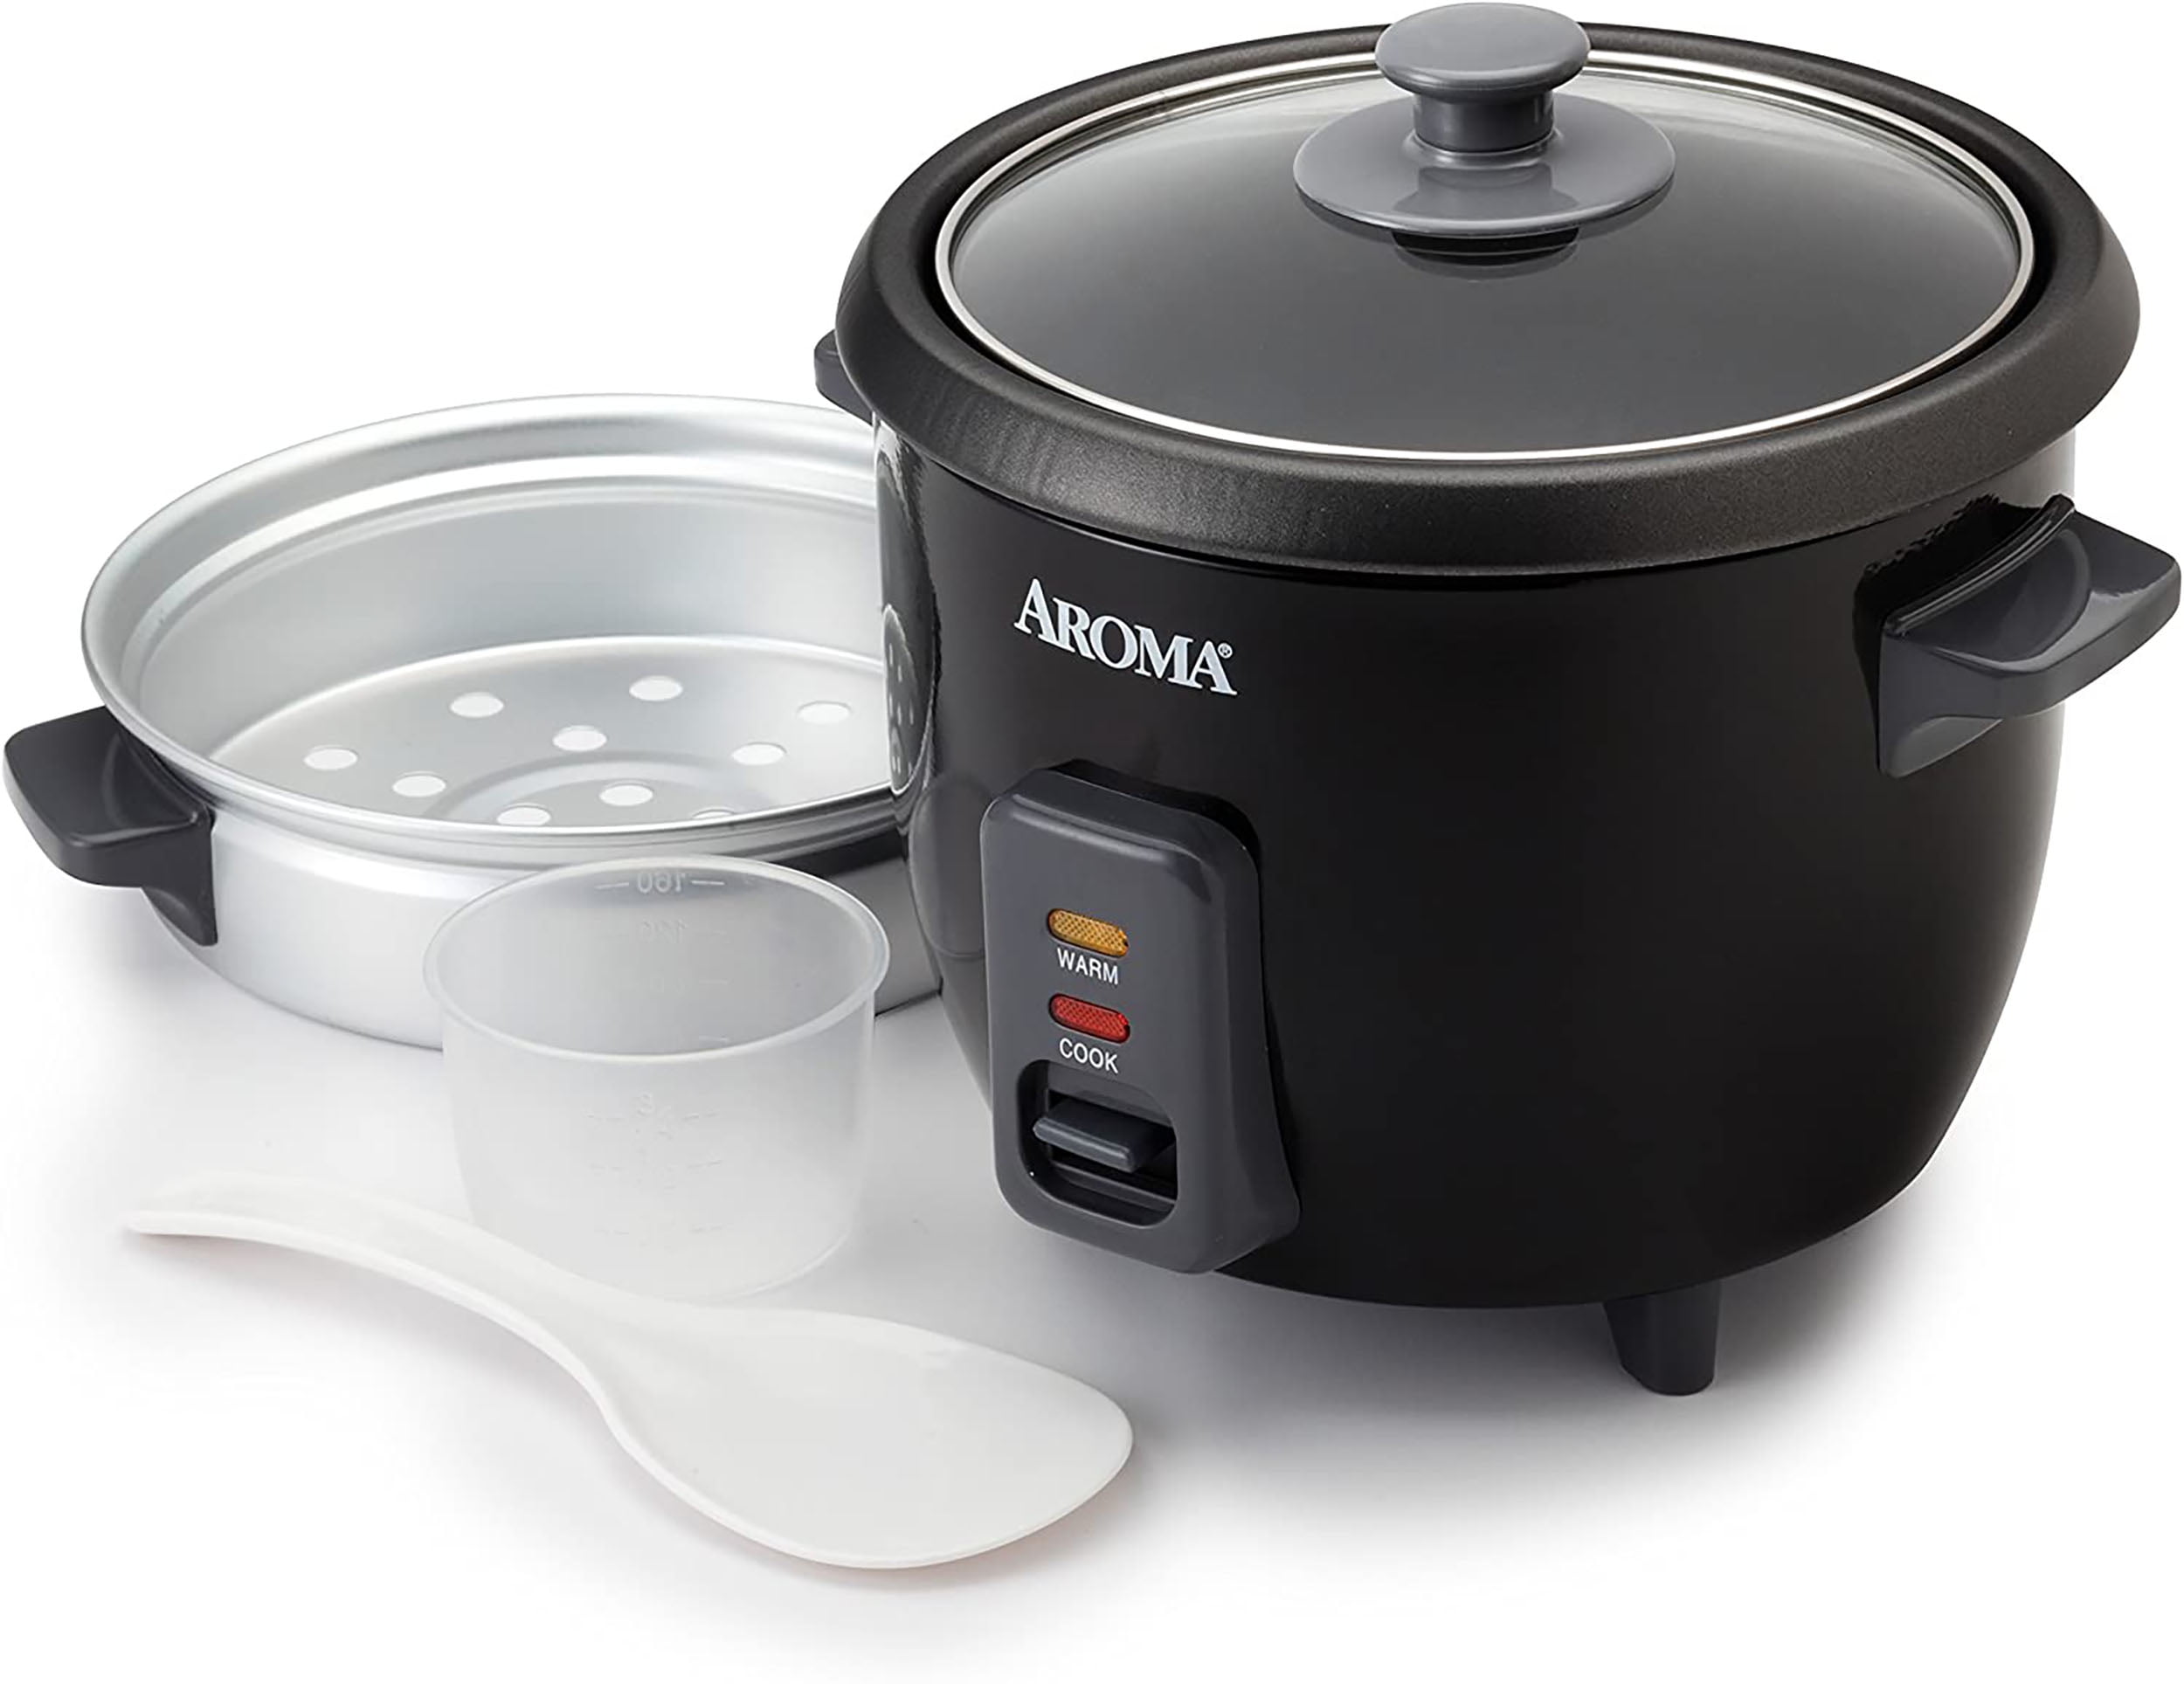 Aroma Pot-Style Rice Cooker and Food Steamer - Black/Silver, 1 ct - Fred  Meyer